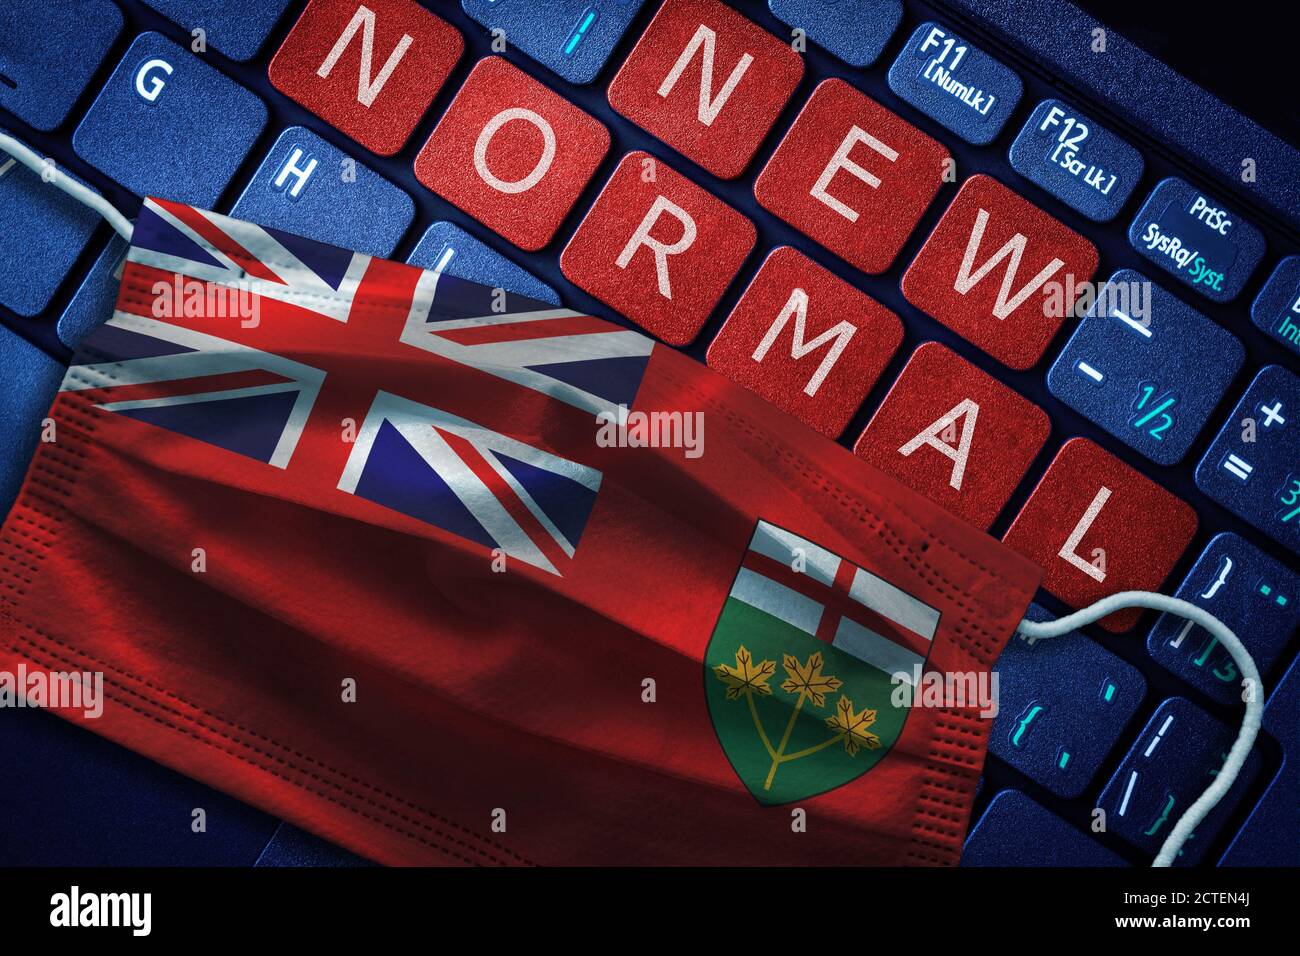 COVID-19 coronavirus new normal concept in the Canadian province of Ontario as shown by Ontario flag on face mask with New Normal on laptop red alert Stock Photo